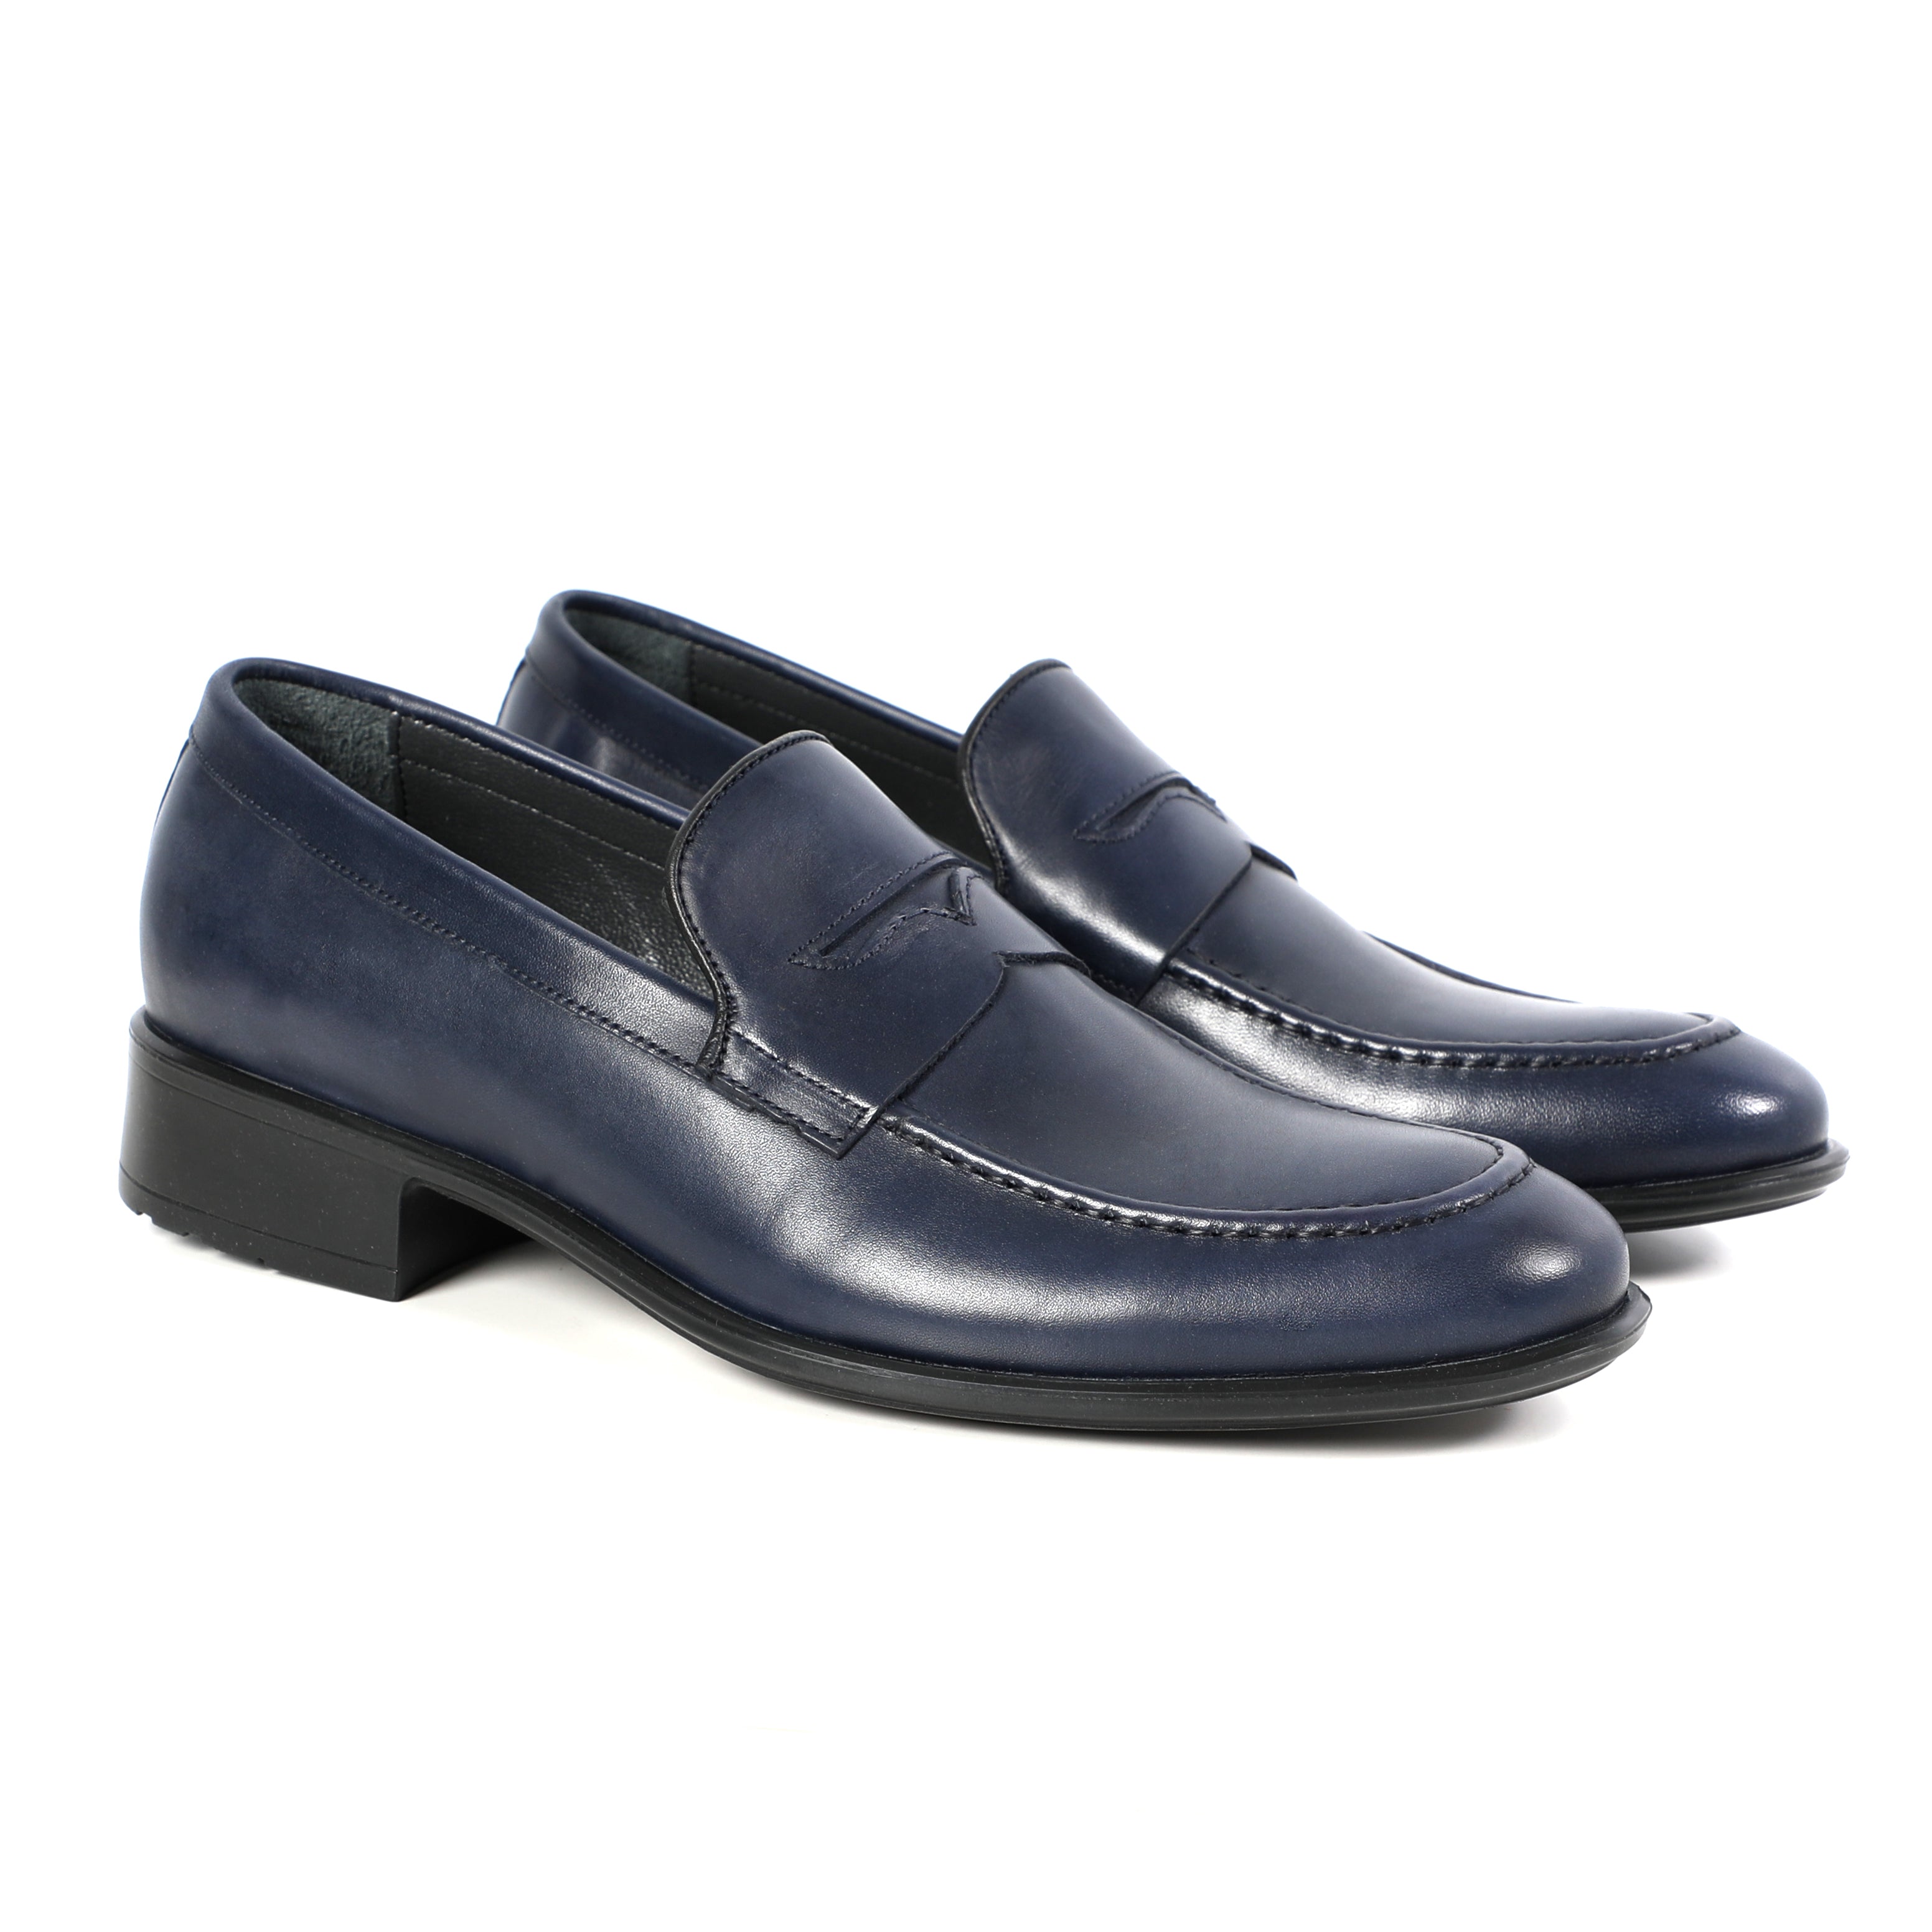 Dark Navy Blue Classic Glossy Shoes